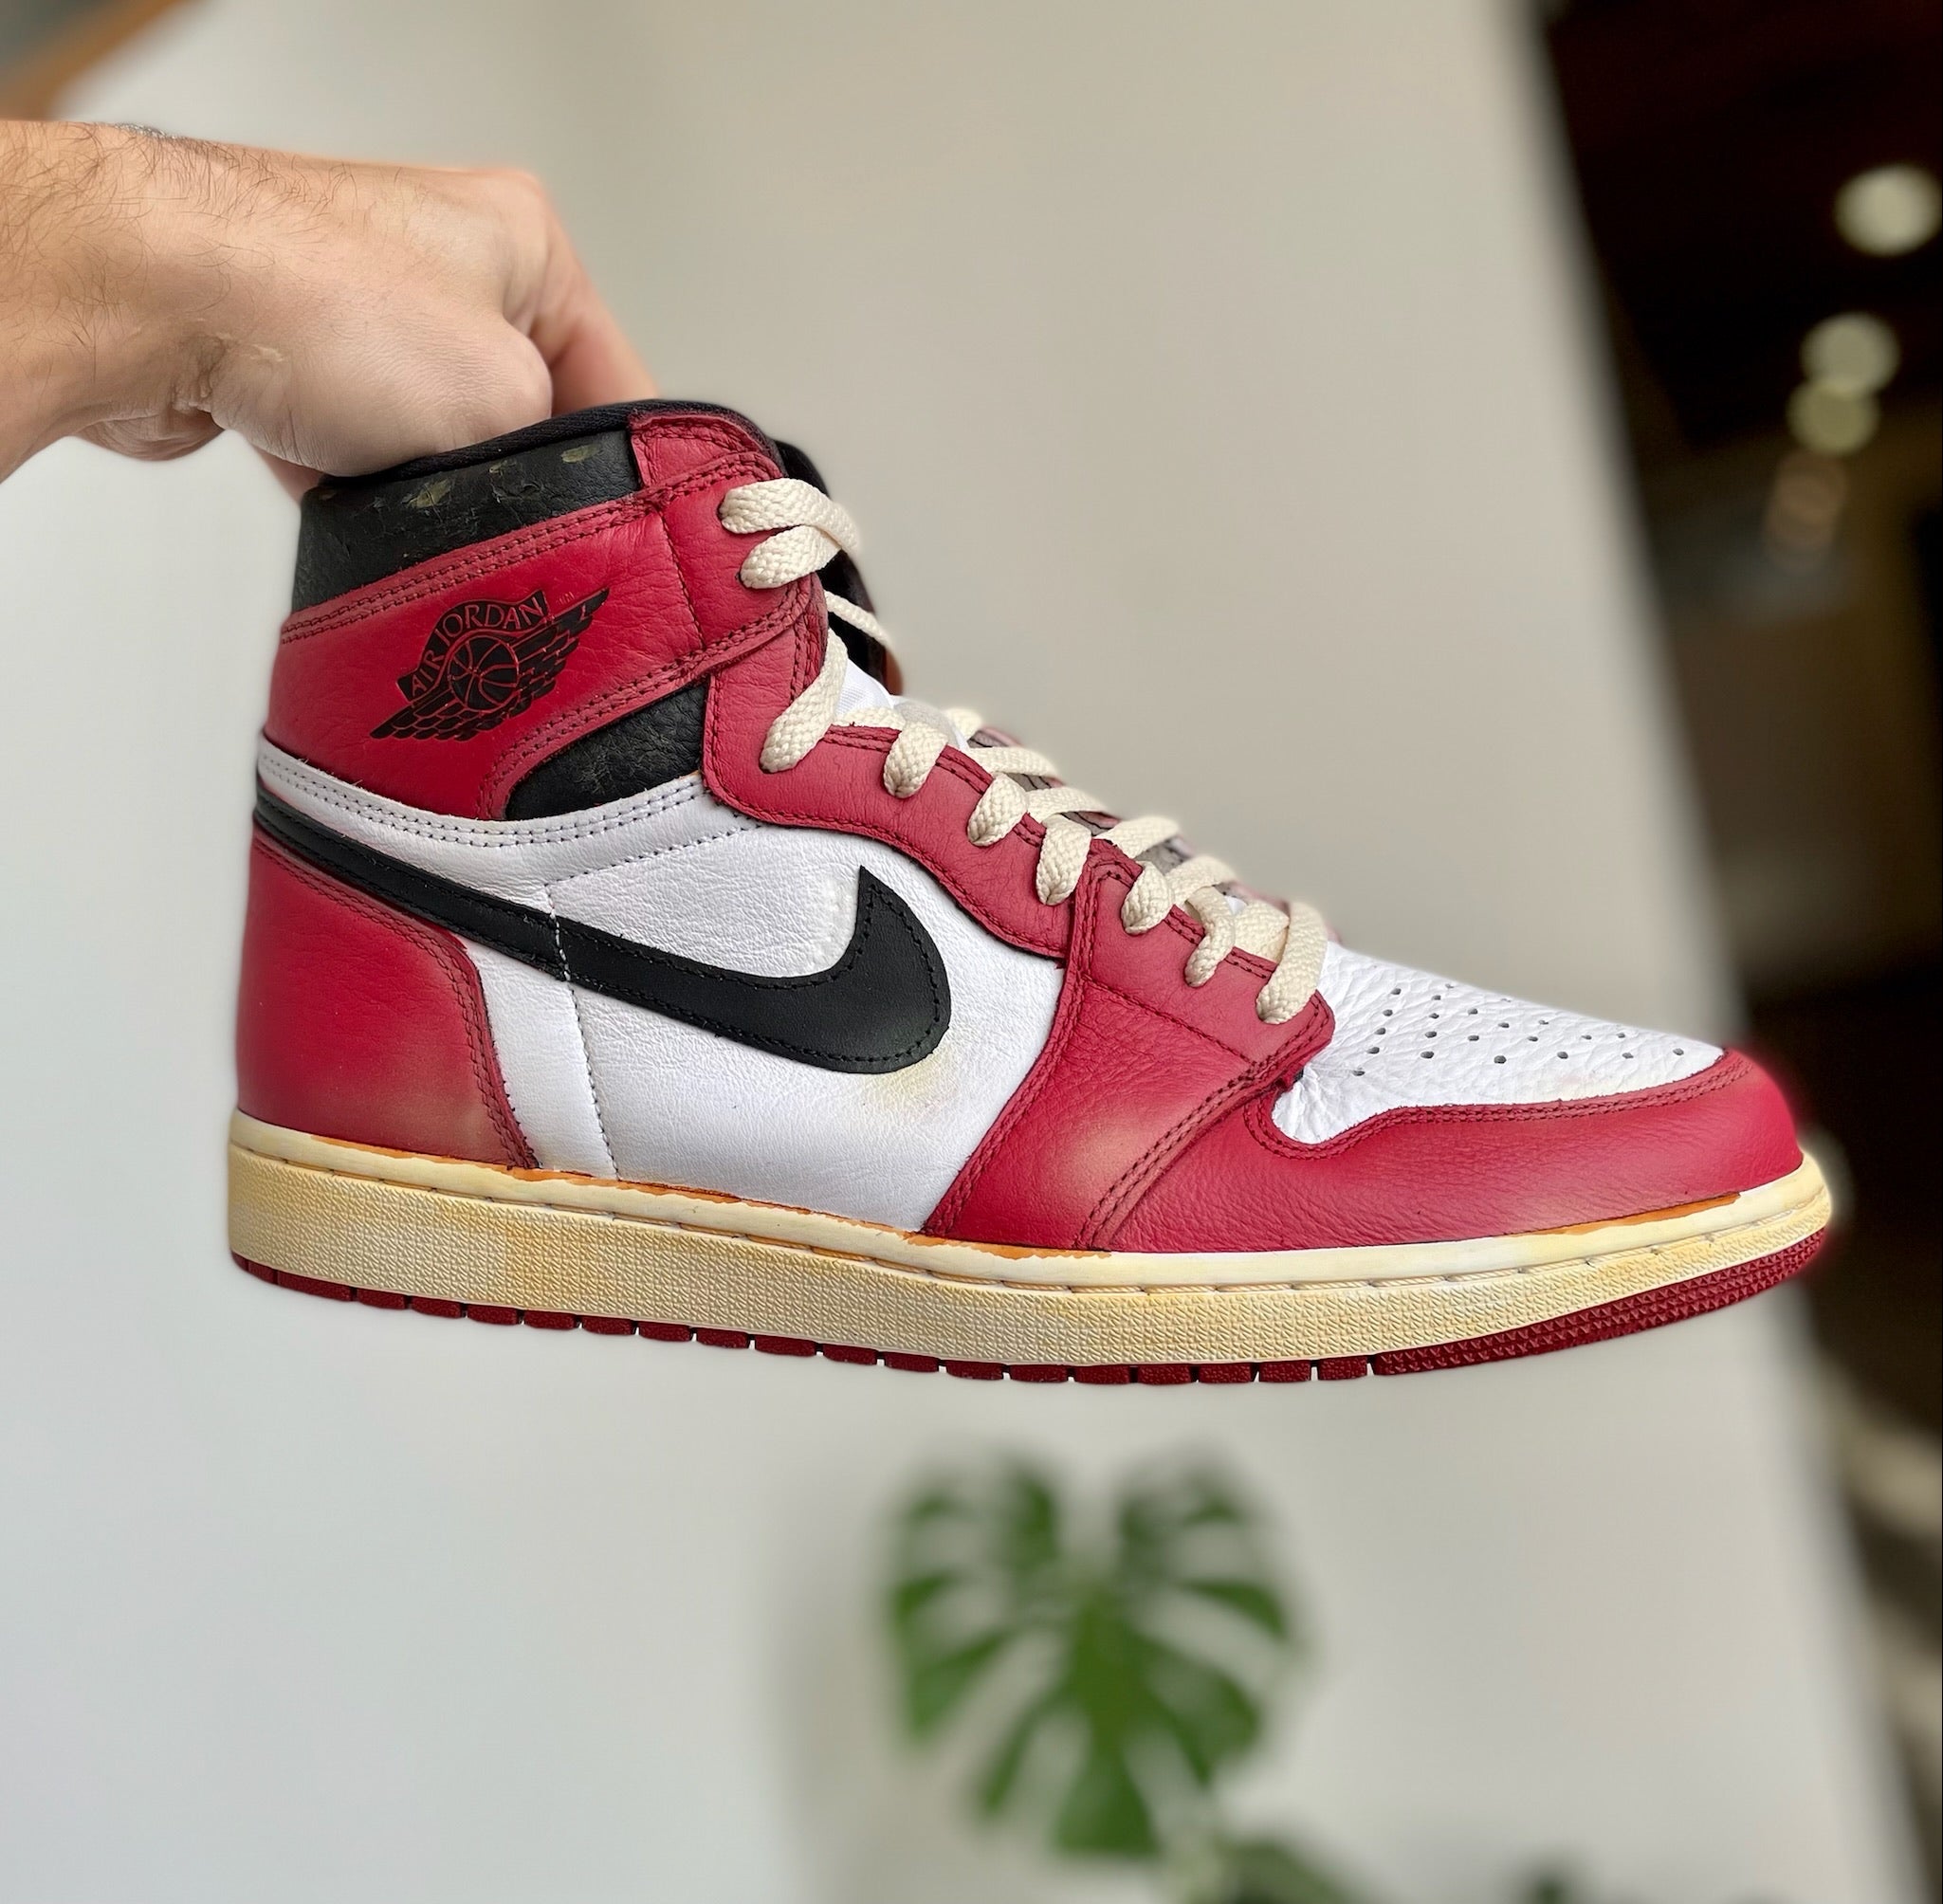 The Chicago Air Jordan 1 Gets an Exotic Makeover